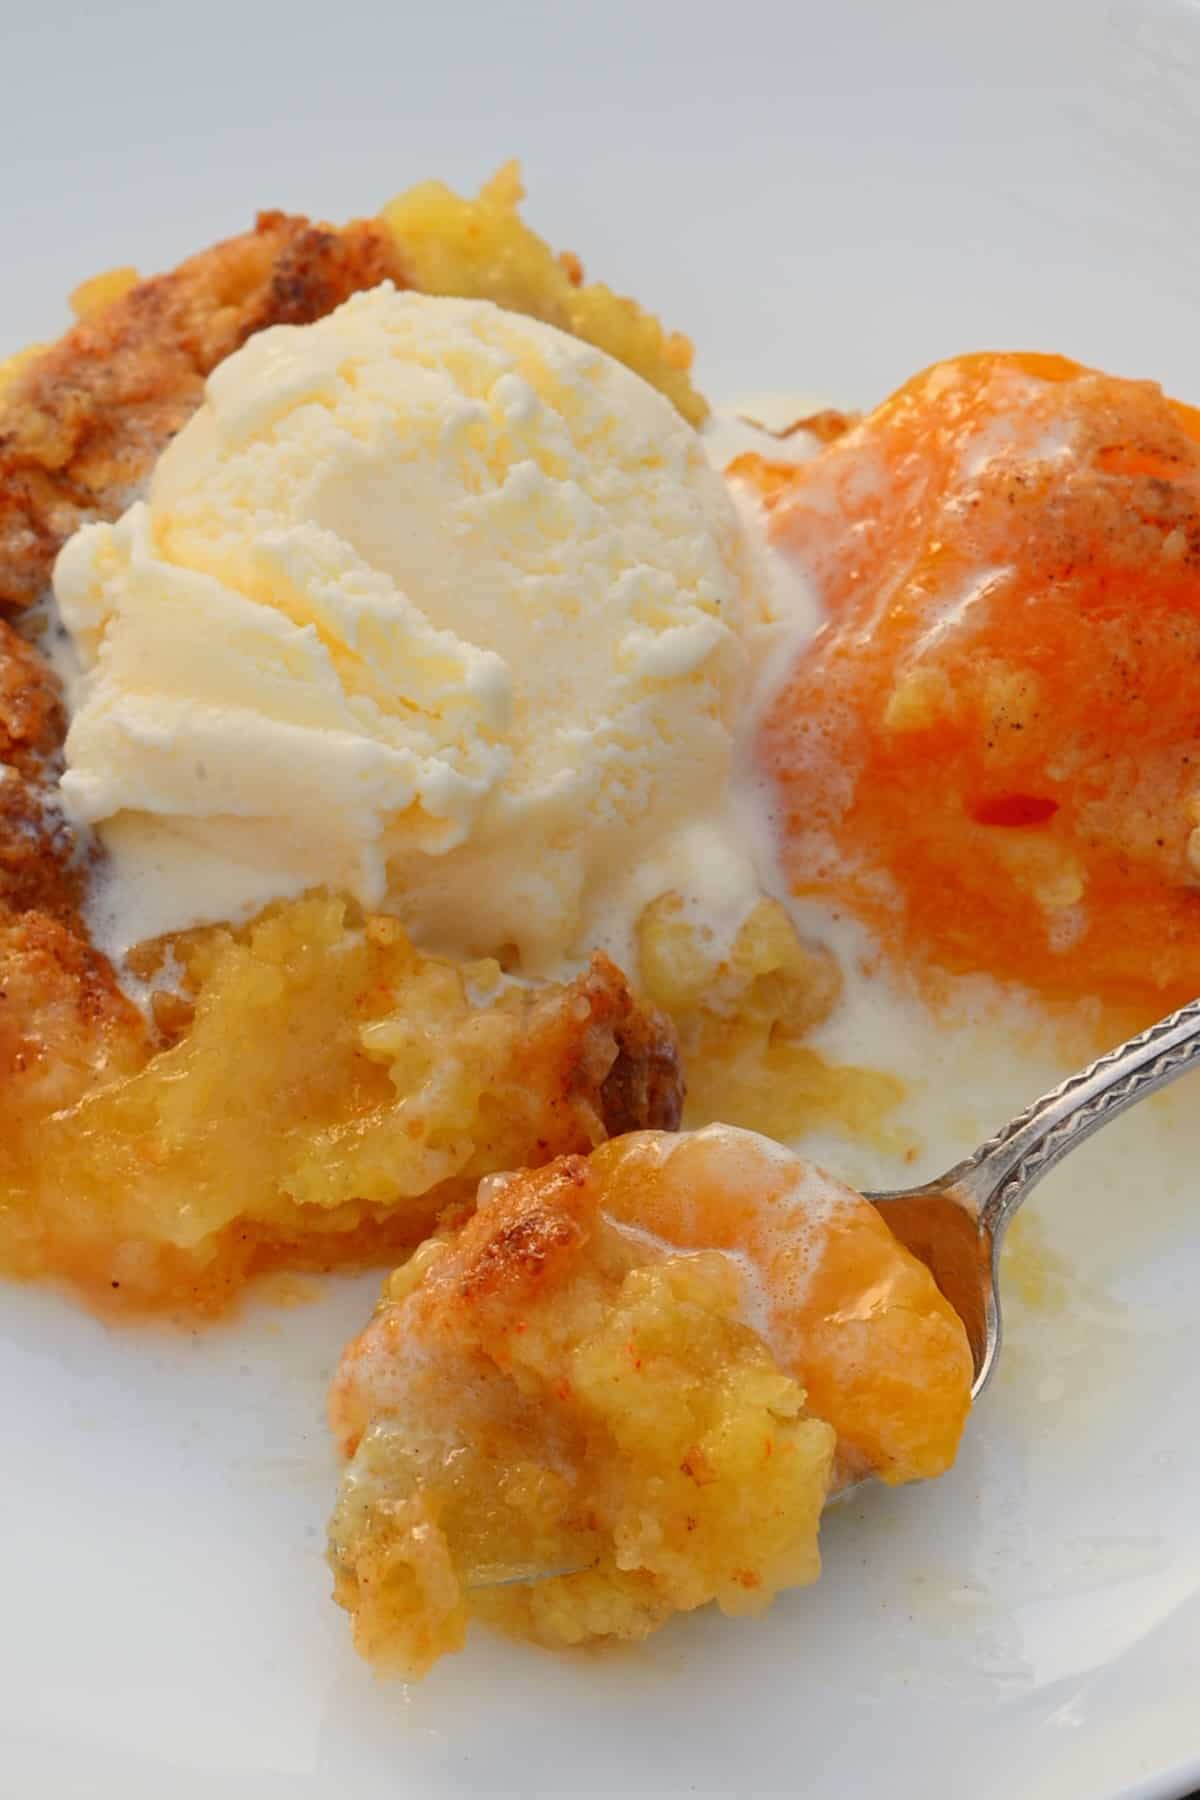 A spoonful and a serving of peach dump cake and ice cream